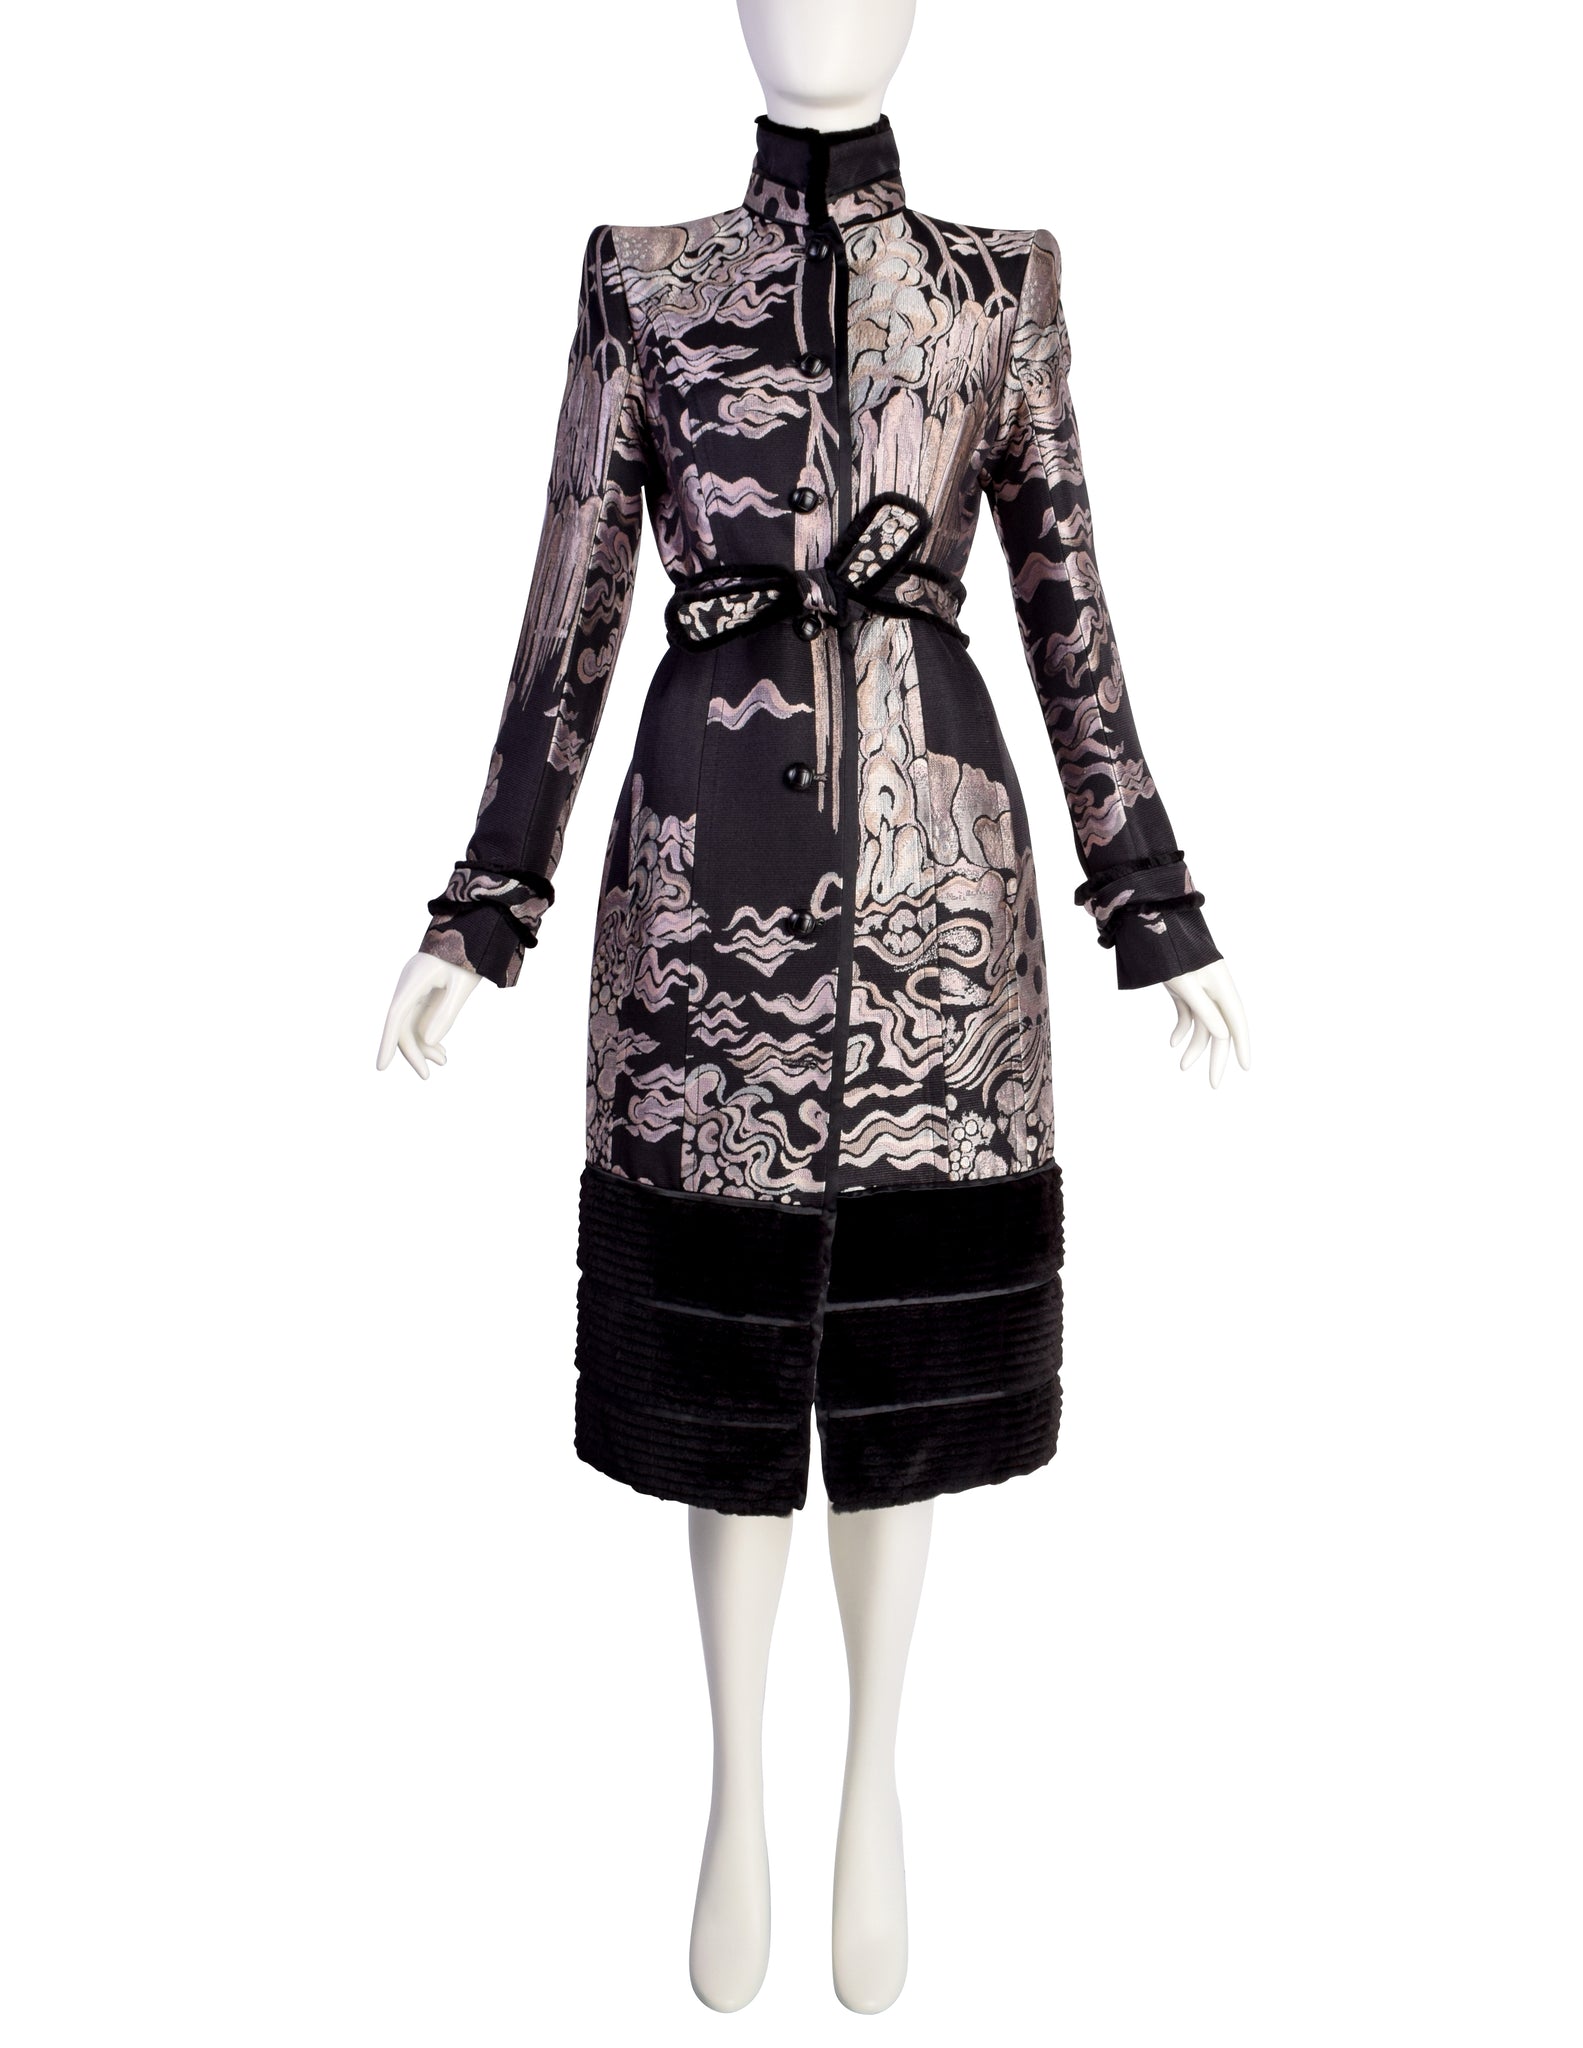 Yves Saint Laurent by Tom Ford Vintage AW2004 Iconic Chinoiserie Scenic Jacquard Fur Trim Coat